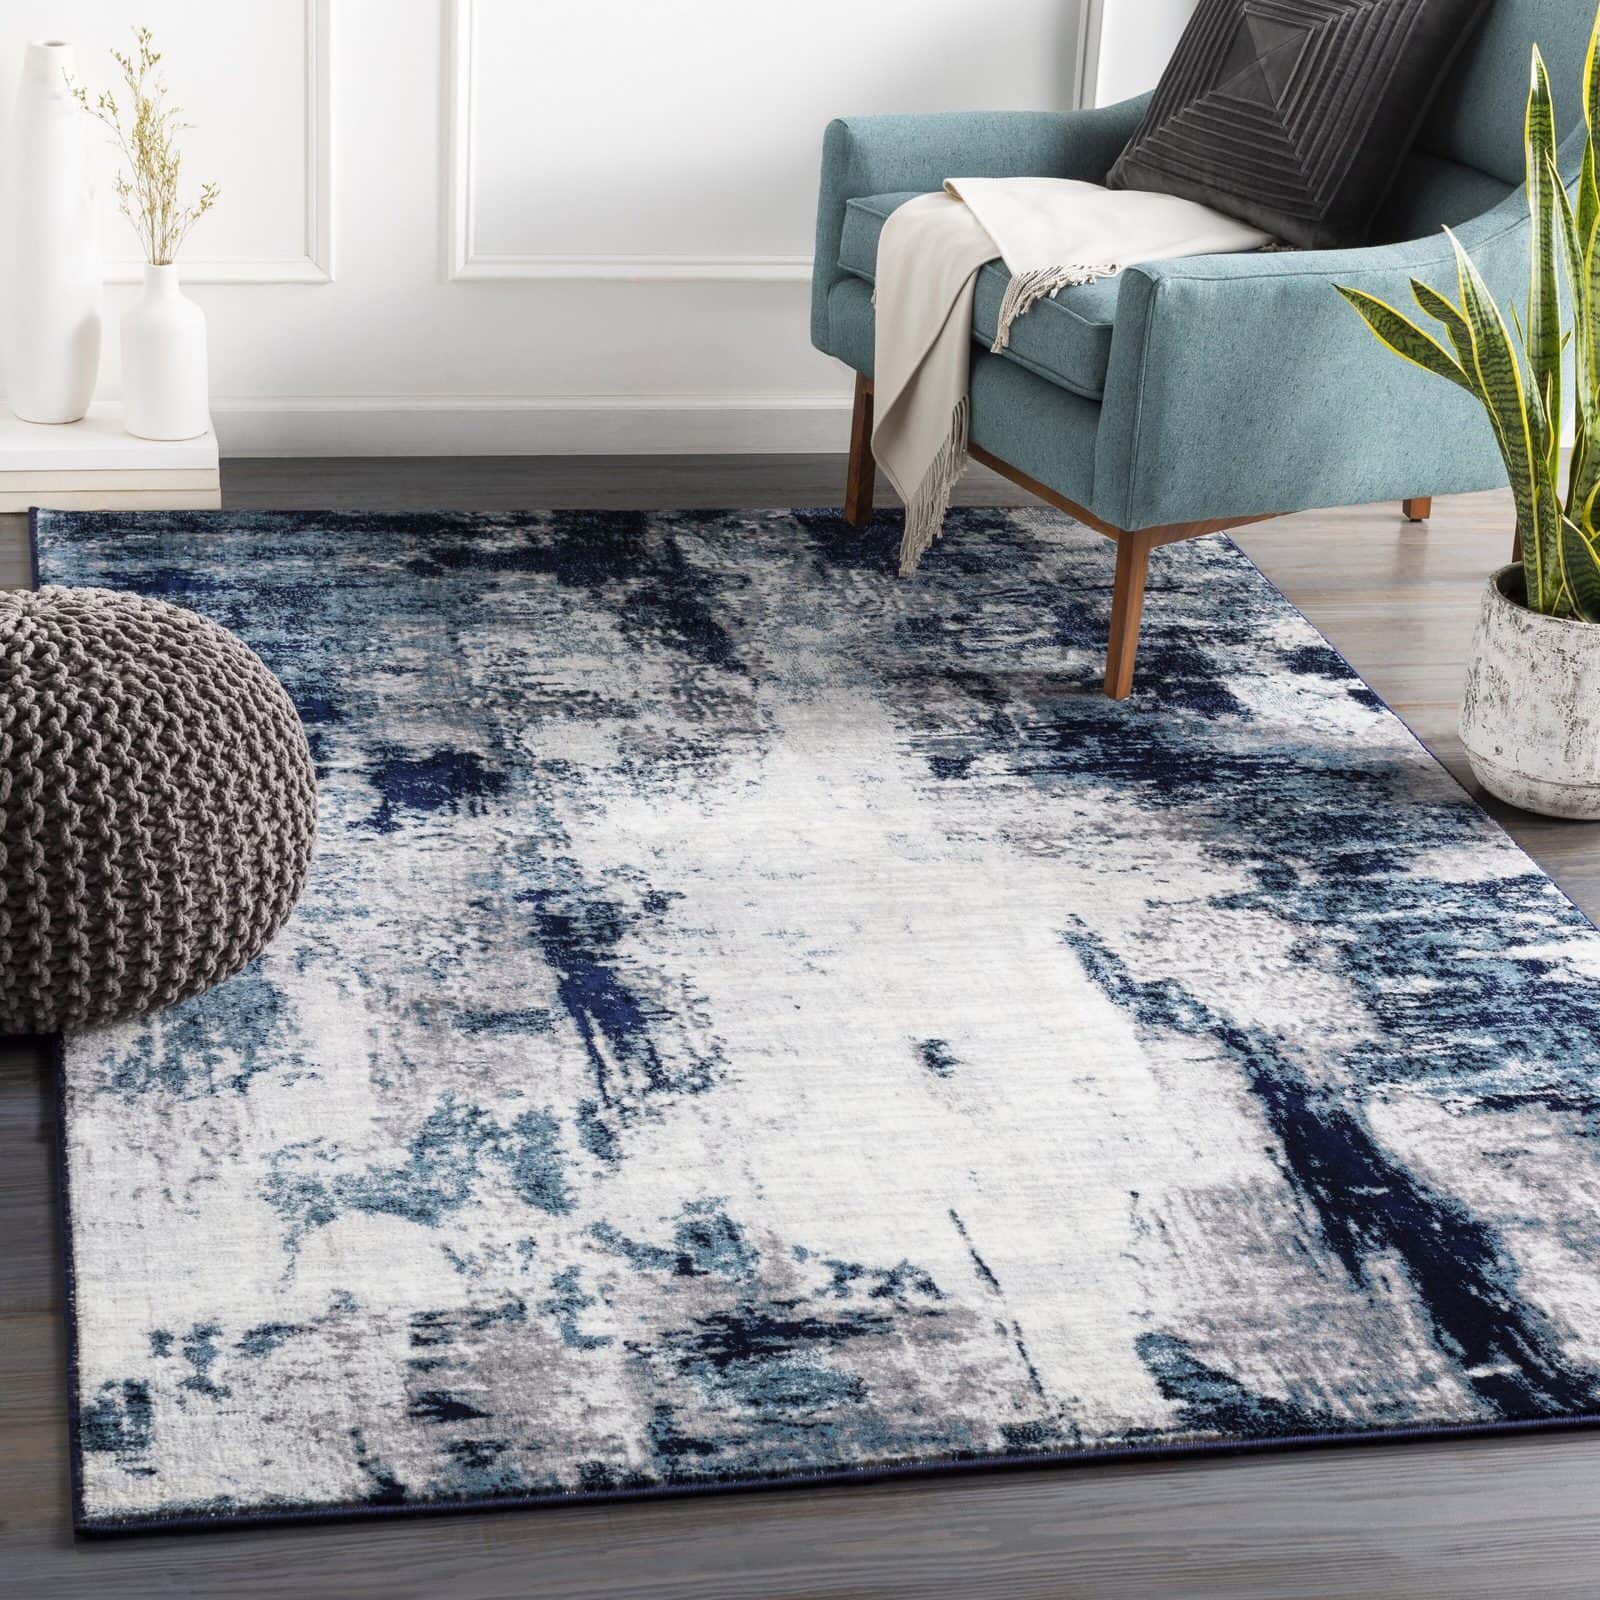 12 Best Navy Blue And White Rugs, Blue Living Room Rugs